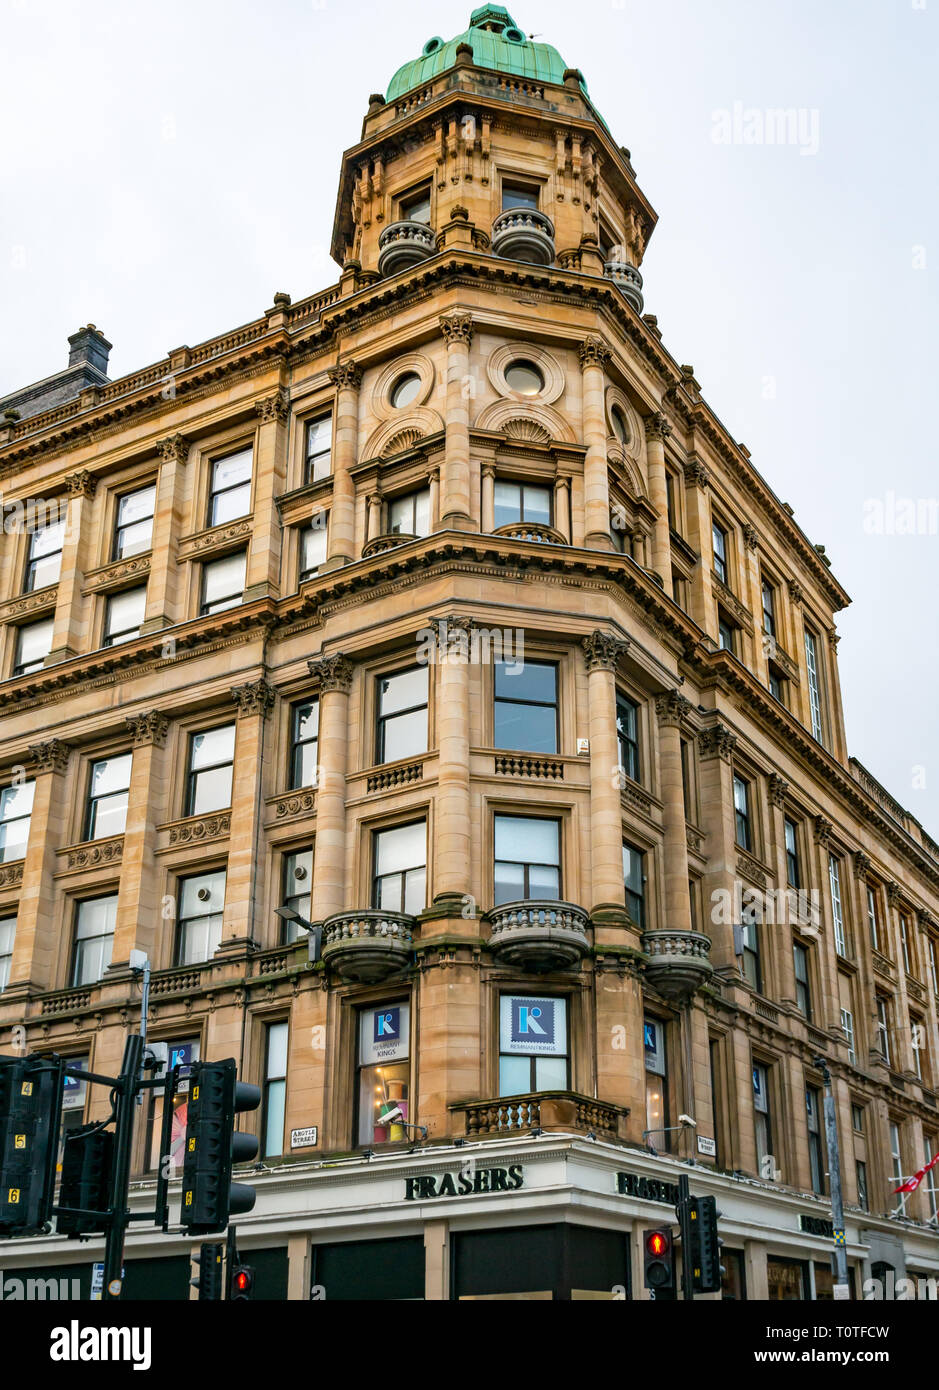 Victorian building of Frasers Department Store, corner of Buchanan and Argyle Street, Glasgow, Scotland, UK Stock Photo